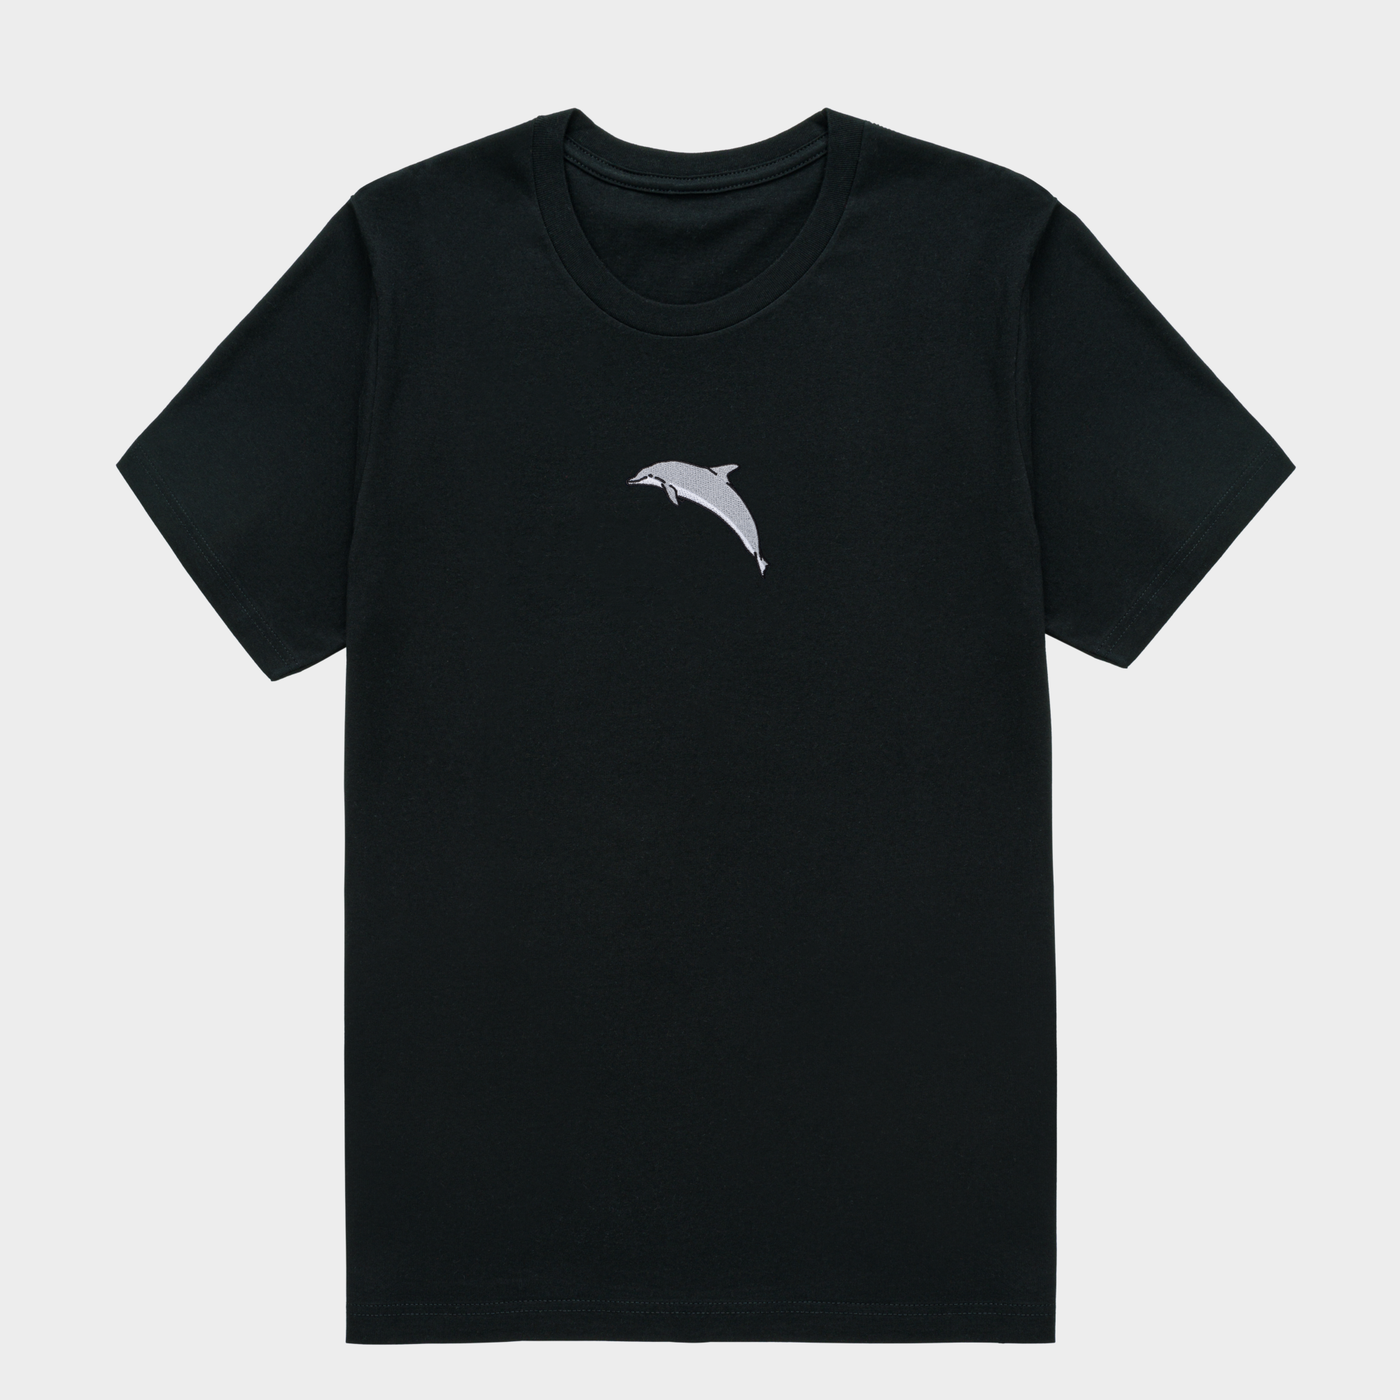 Bobby's Planet Men's Embroidered Dolphin T-Shirt from Seven Seas Fish Animals Collection in Black Color#color_black